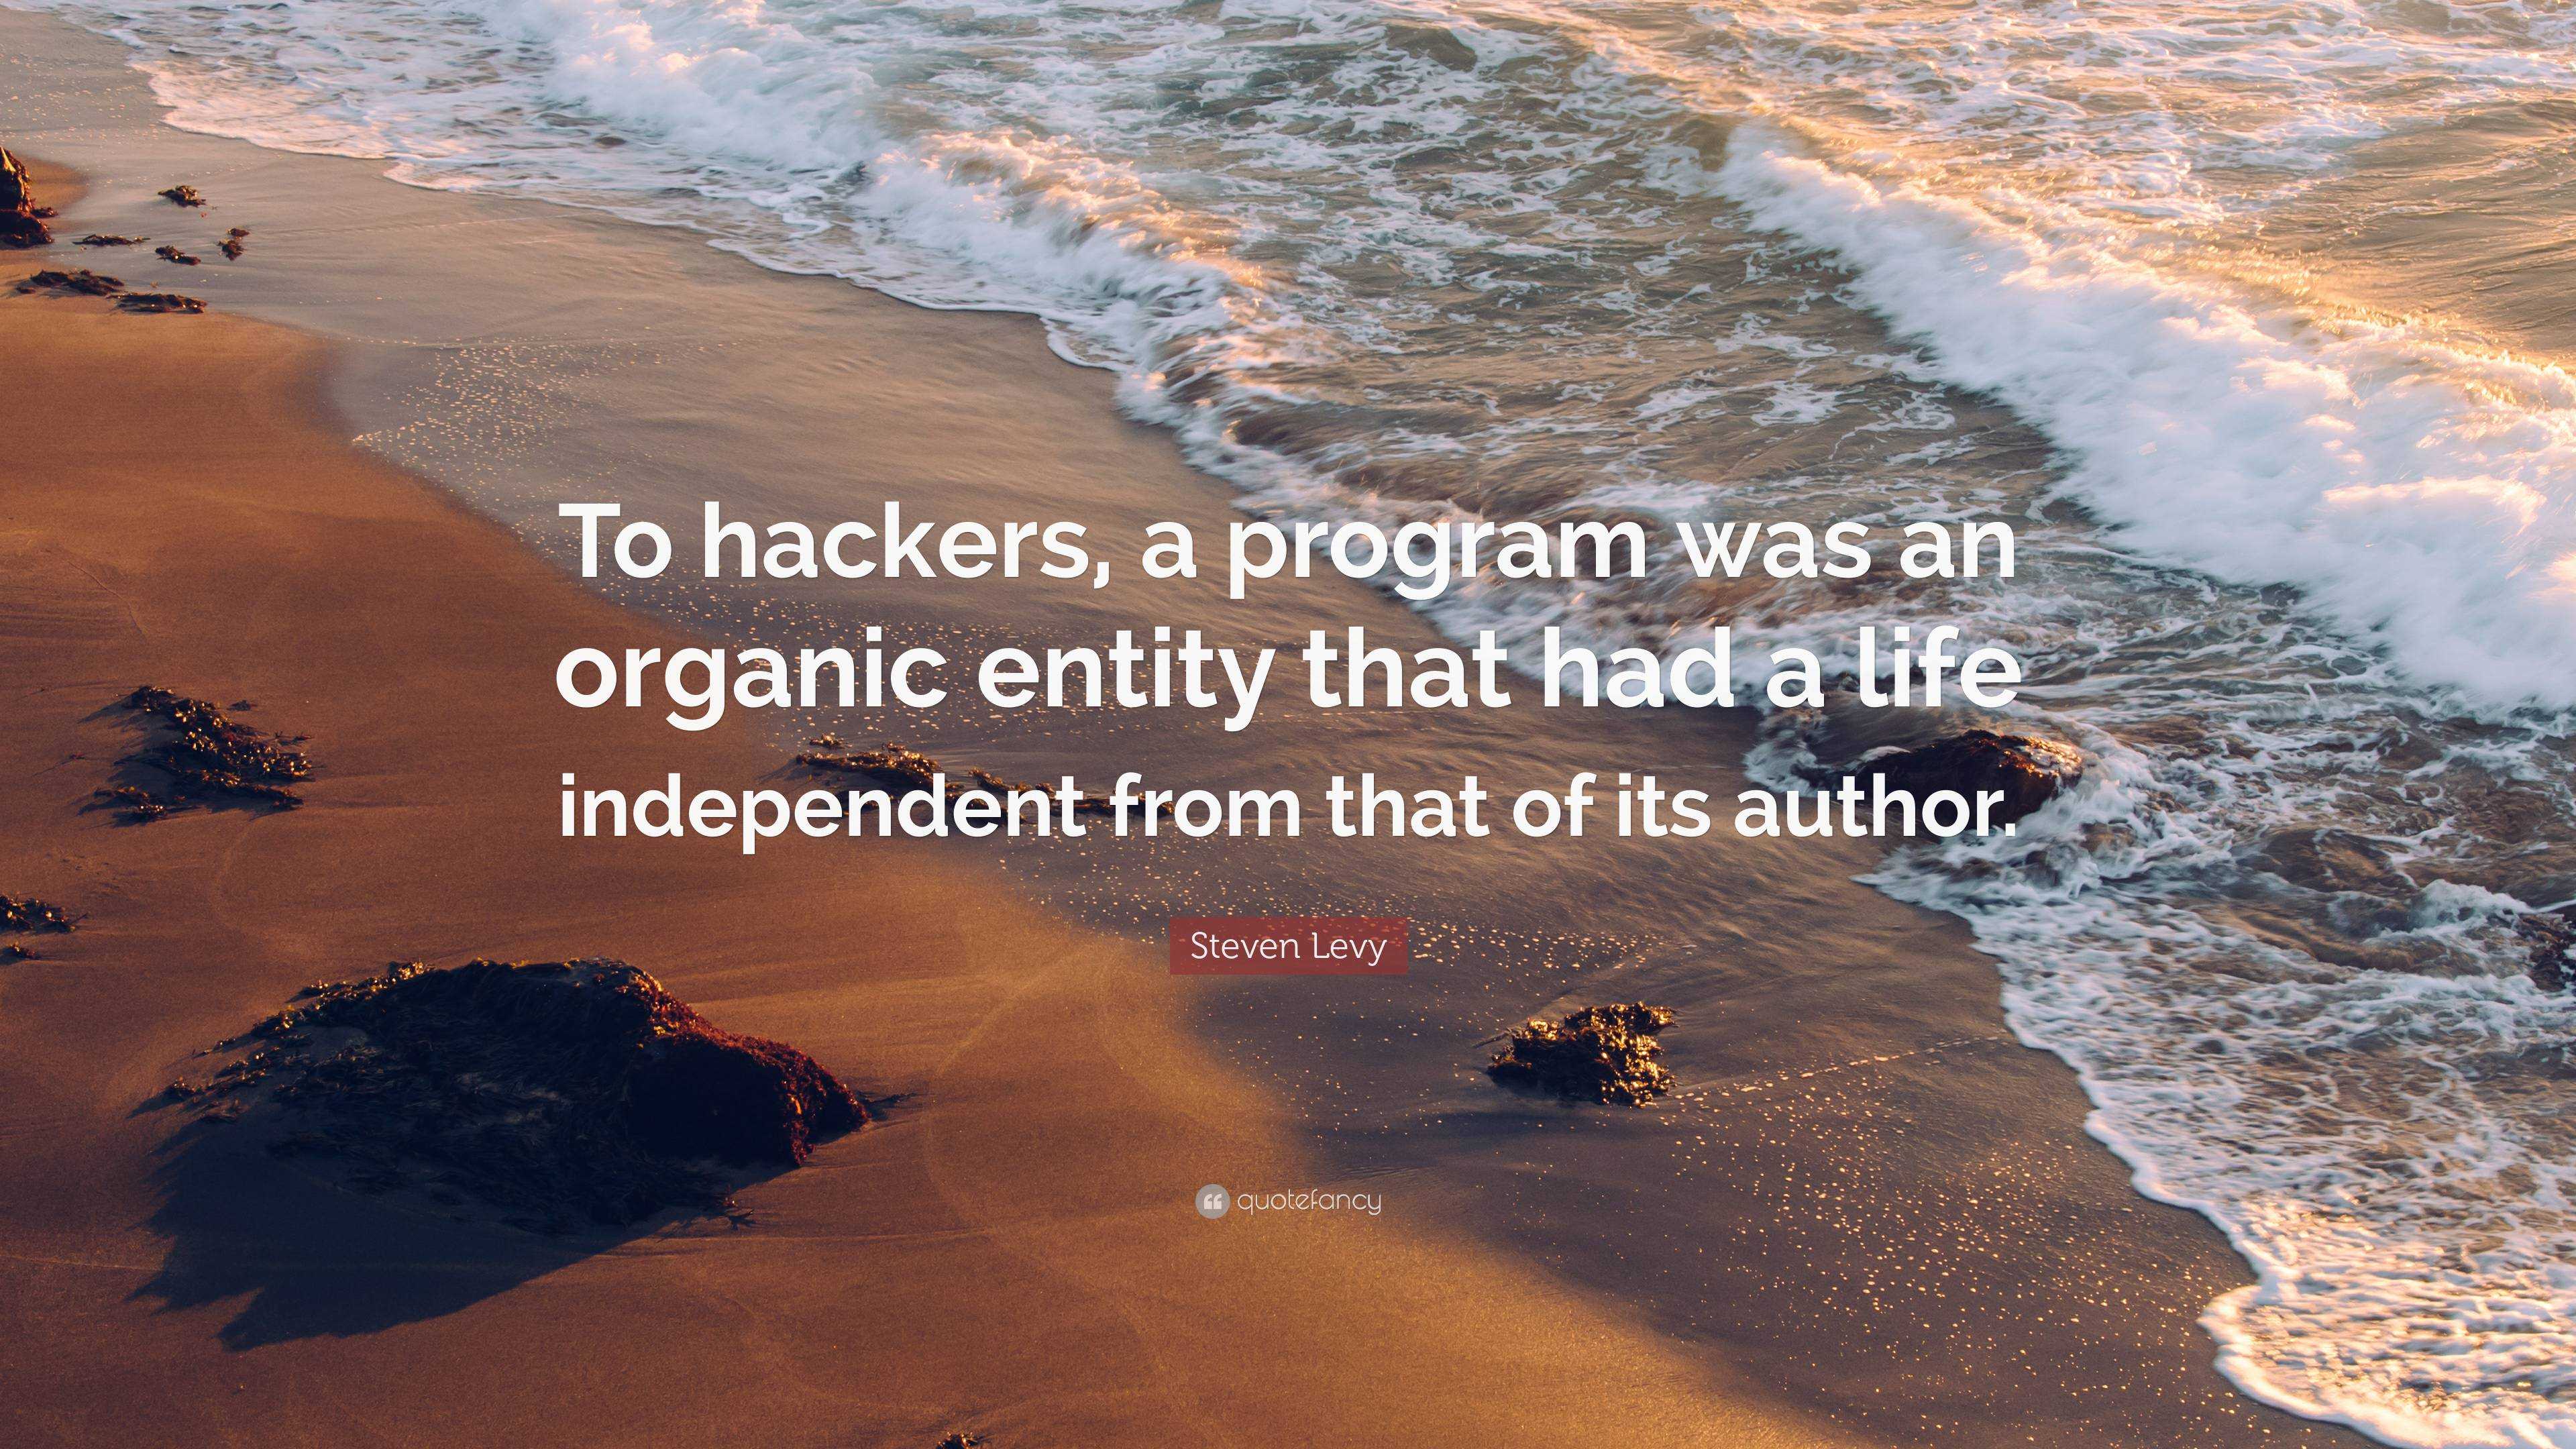 Steven Levy Quote: “To hackers, a program was an organic entity that had a  life independent